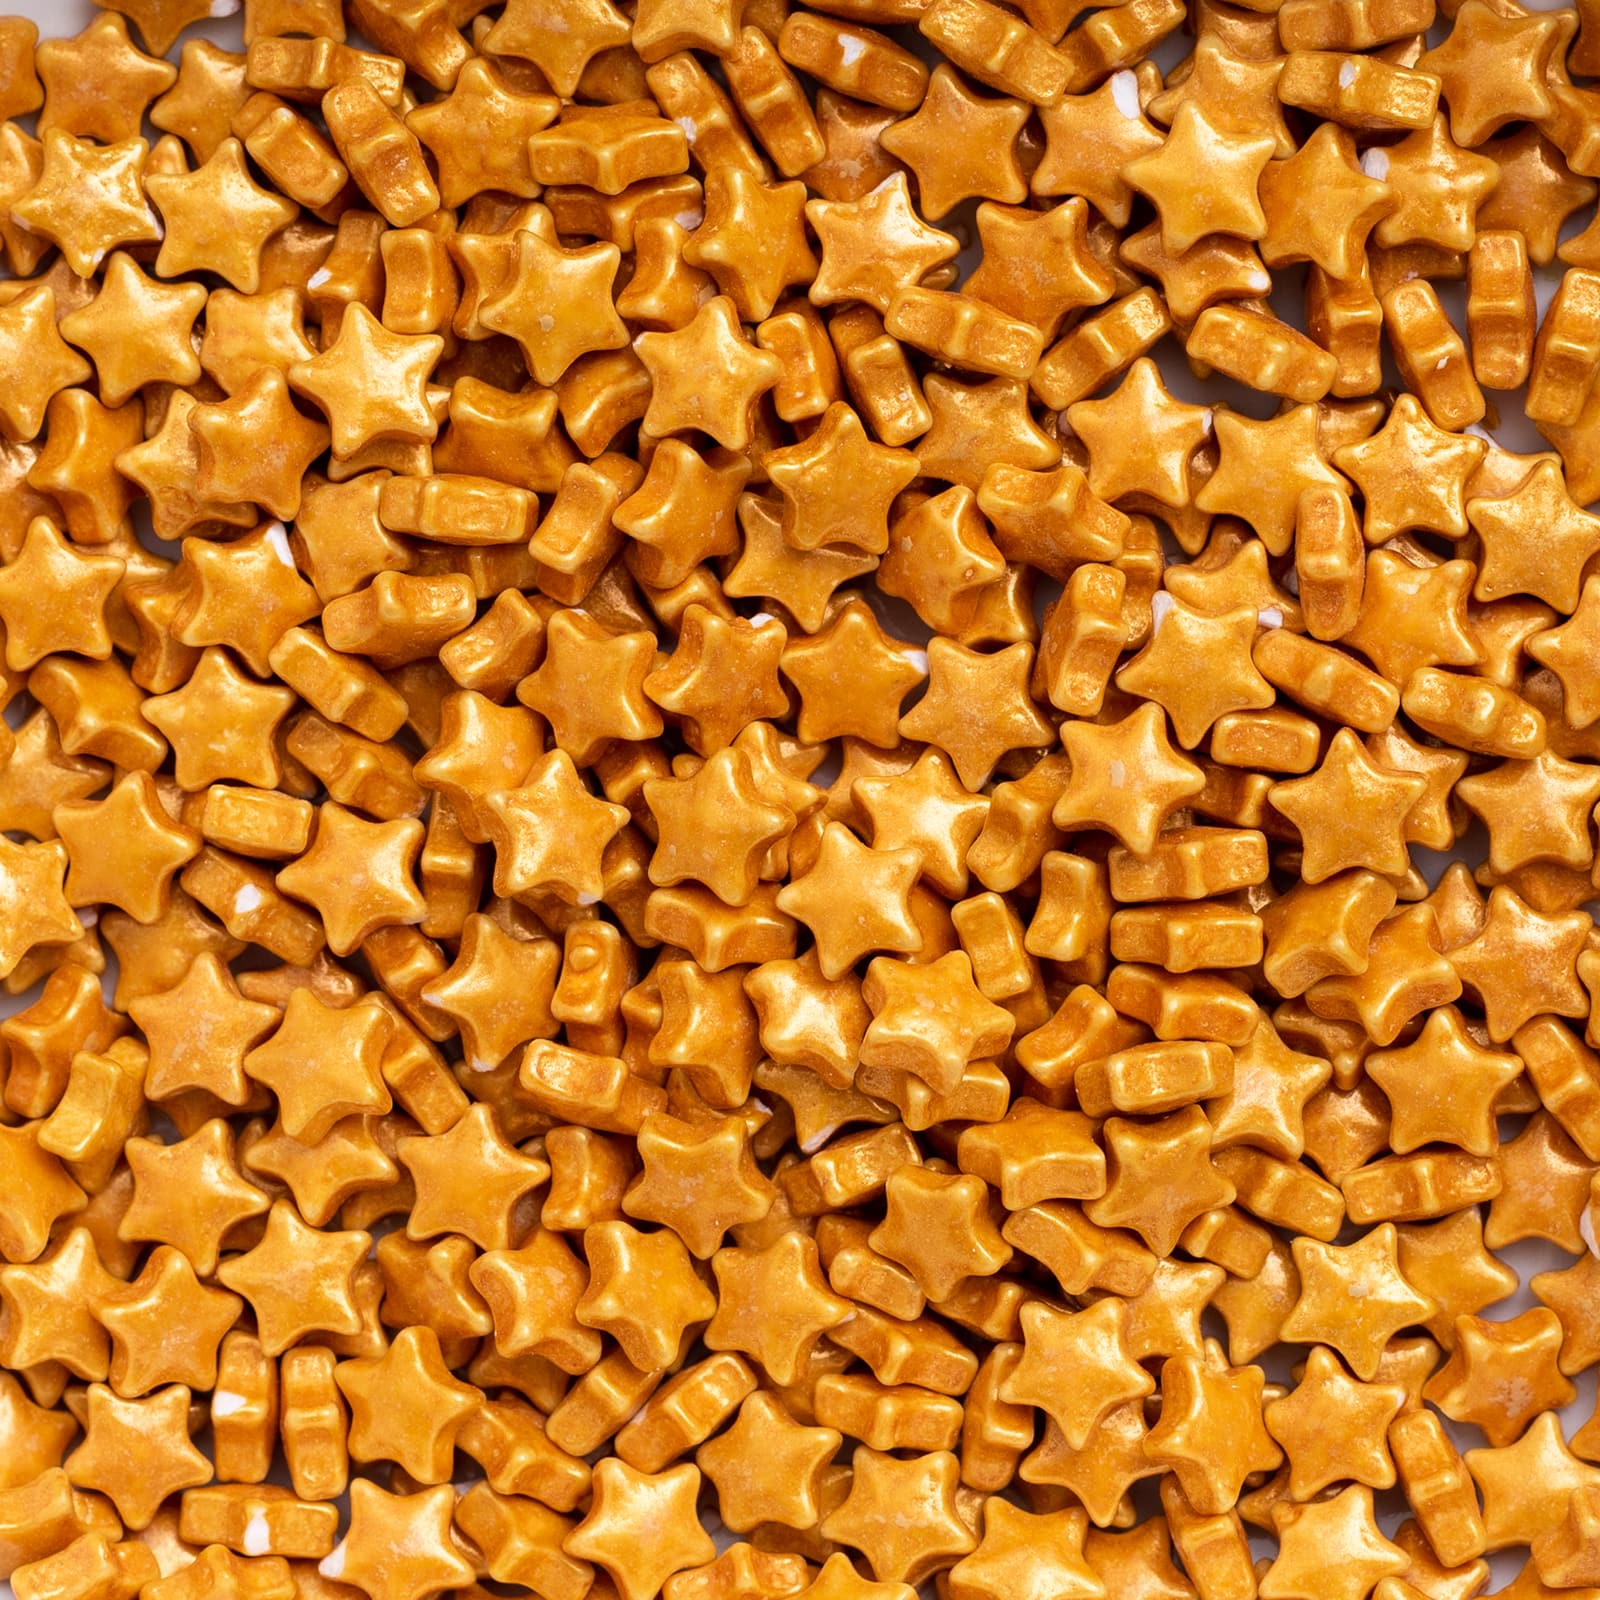 Natural Star Gold Candy Scoops | 12 ct | Zurchers